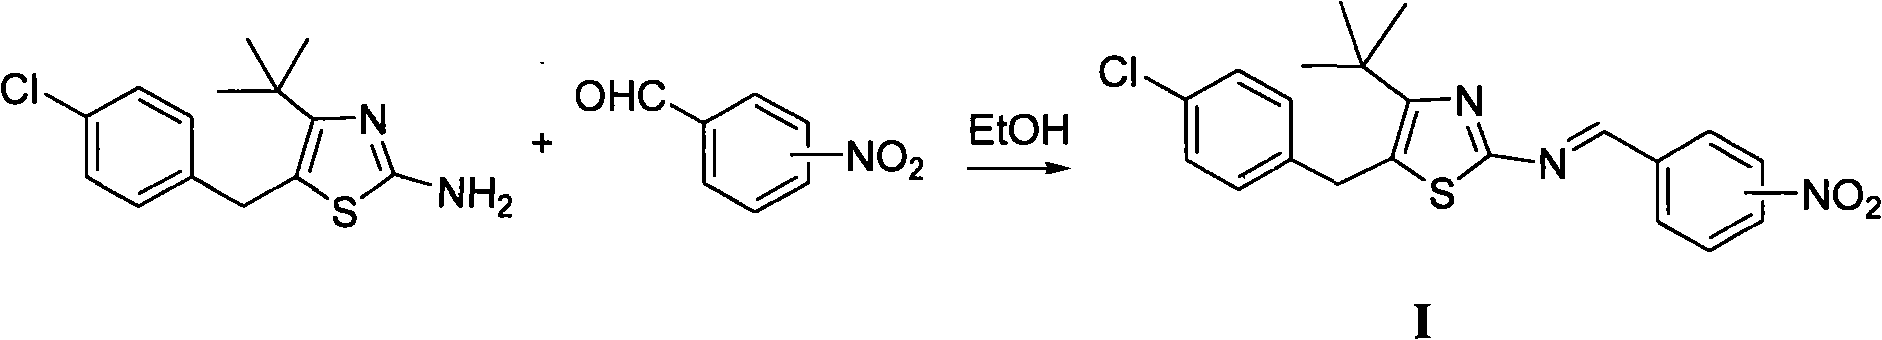 Thiazole schiff base containing nitryl, preparation and uses thereof